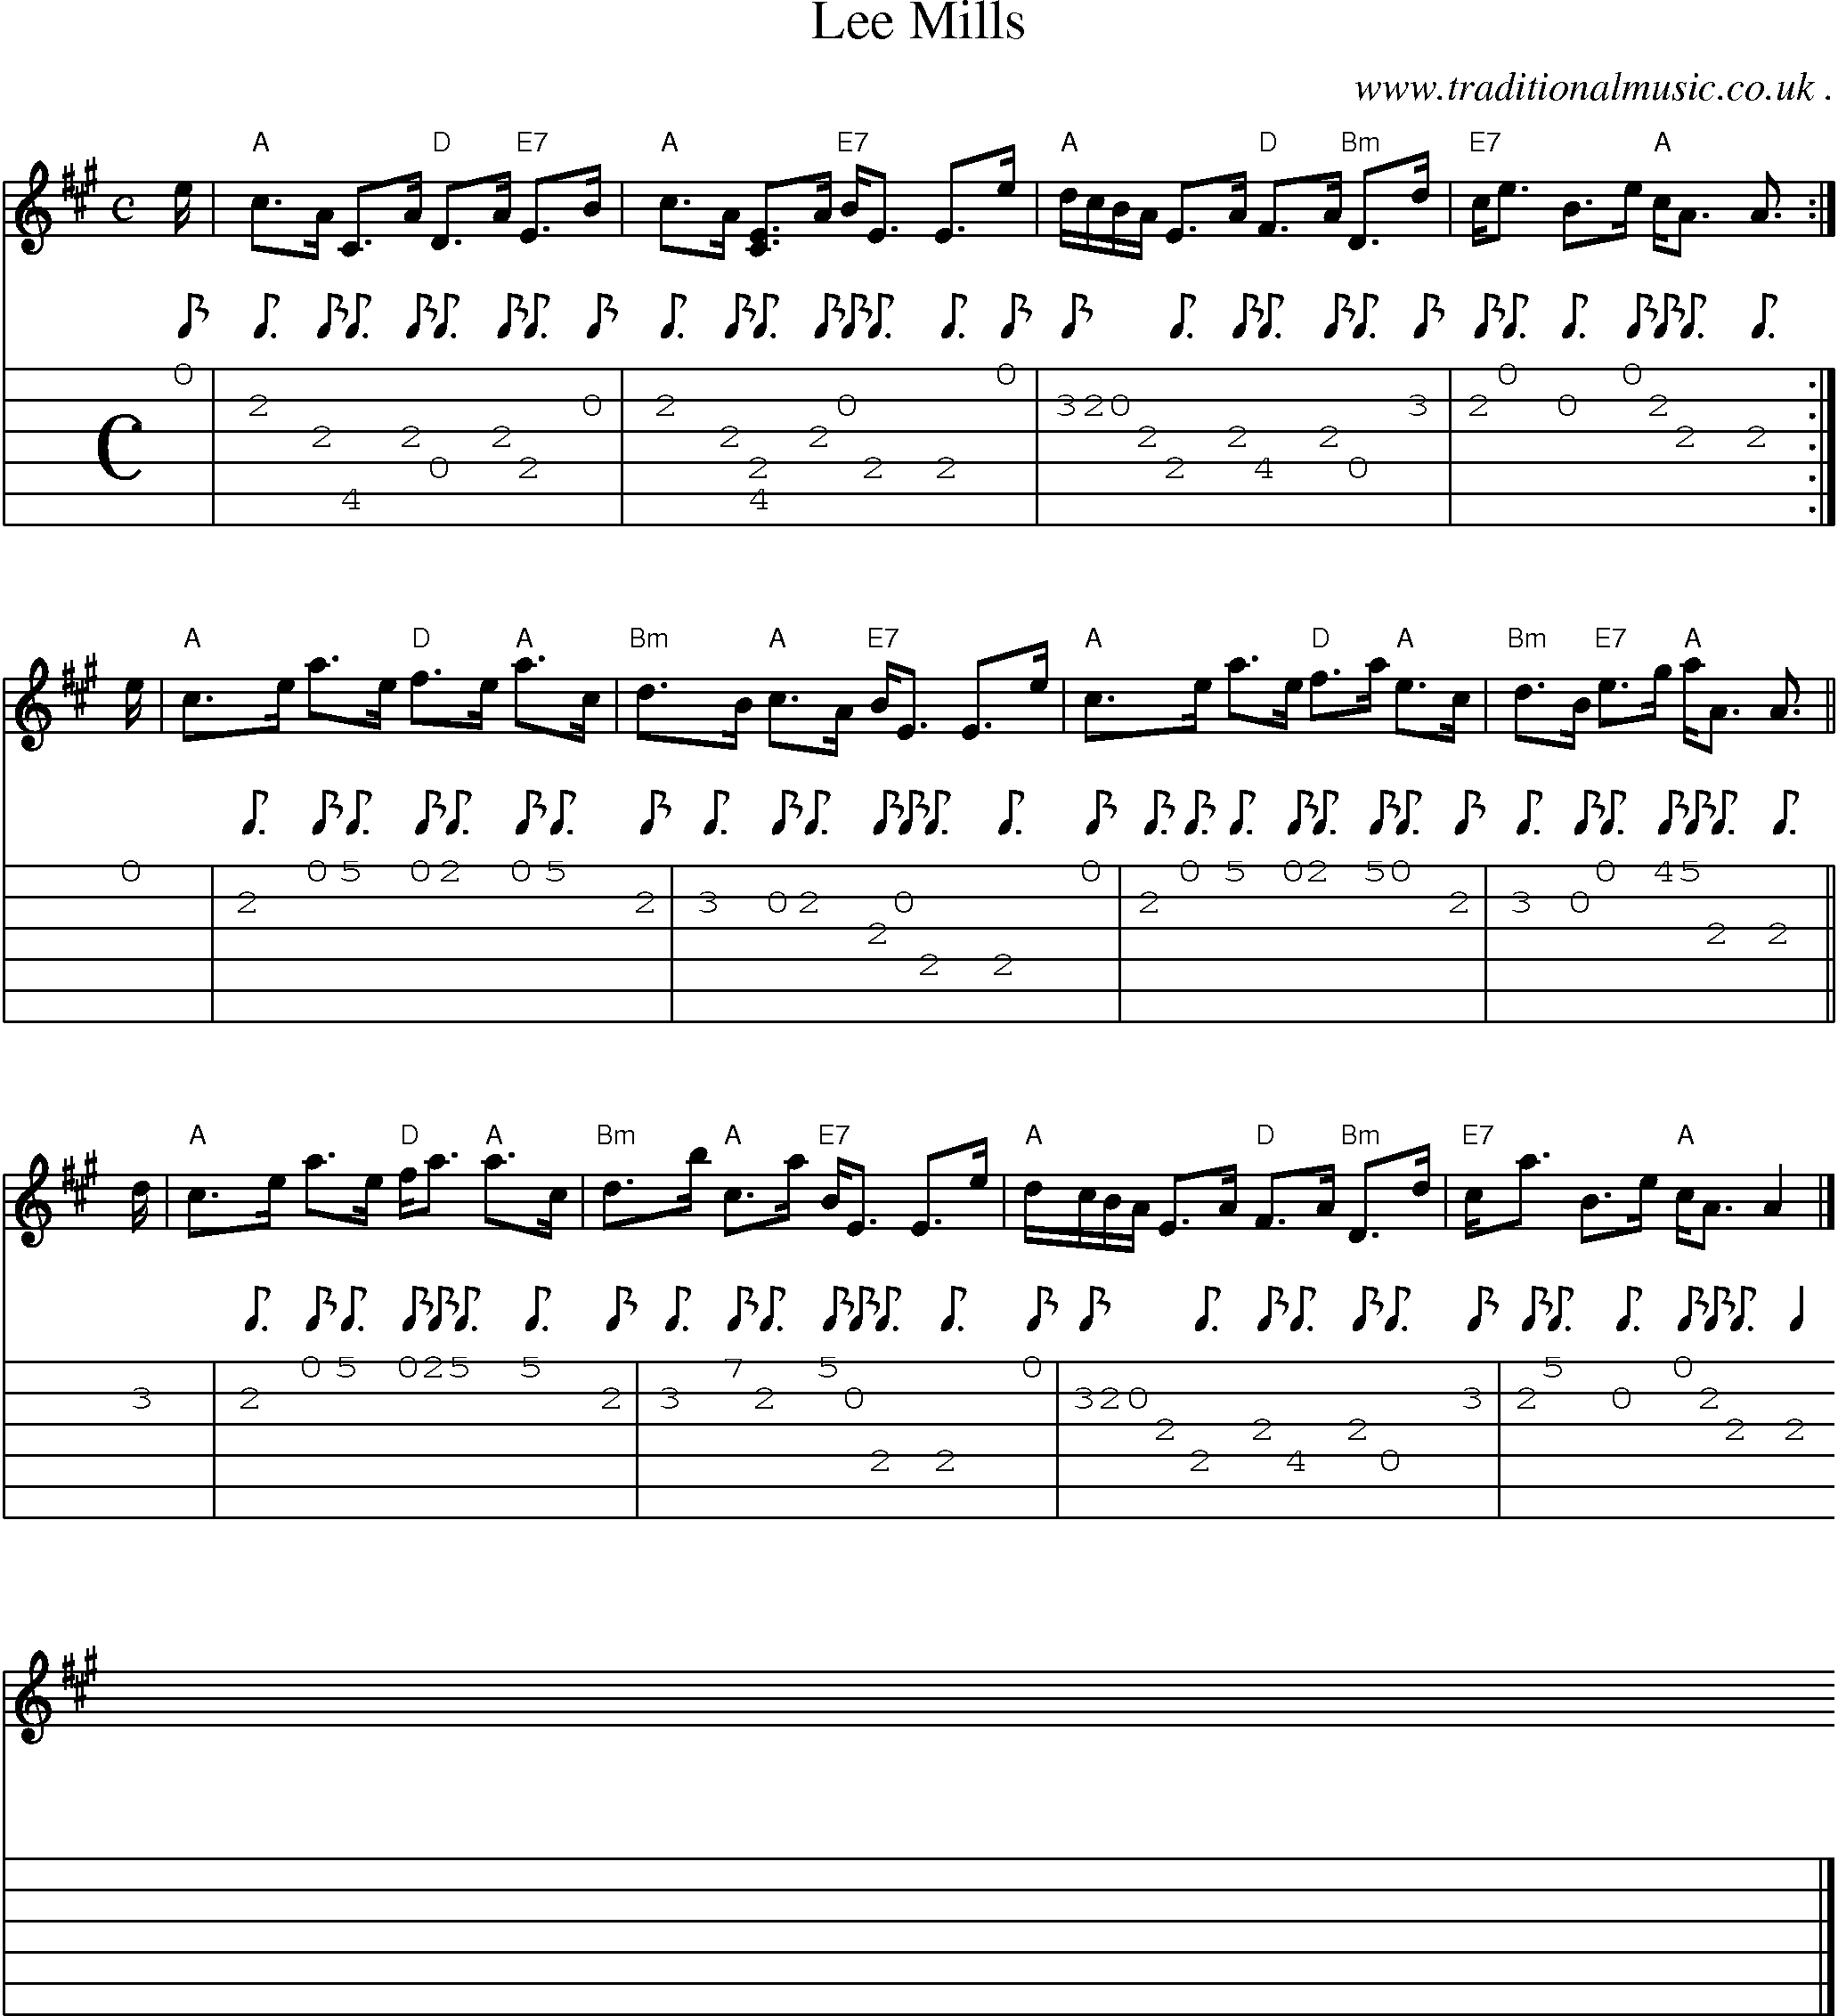 Sheet-music  score, Chords and Guitar Tabs for Lee Mills